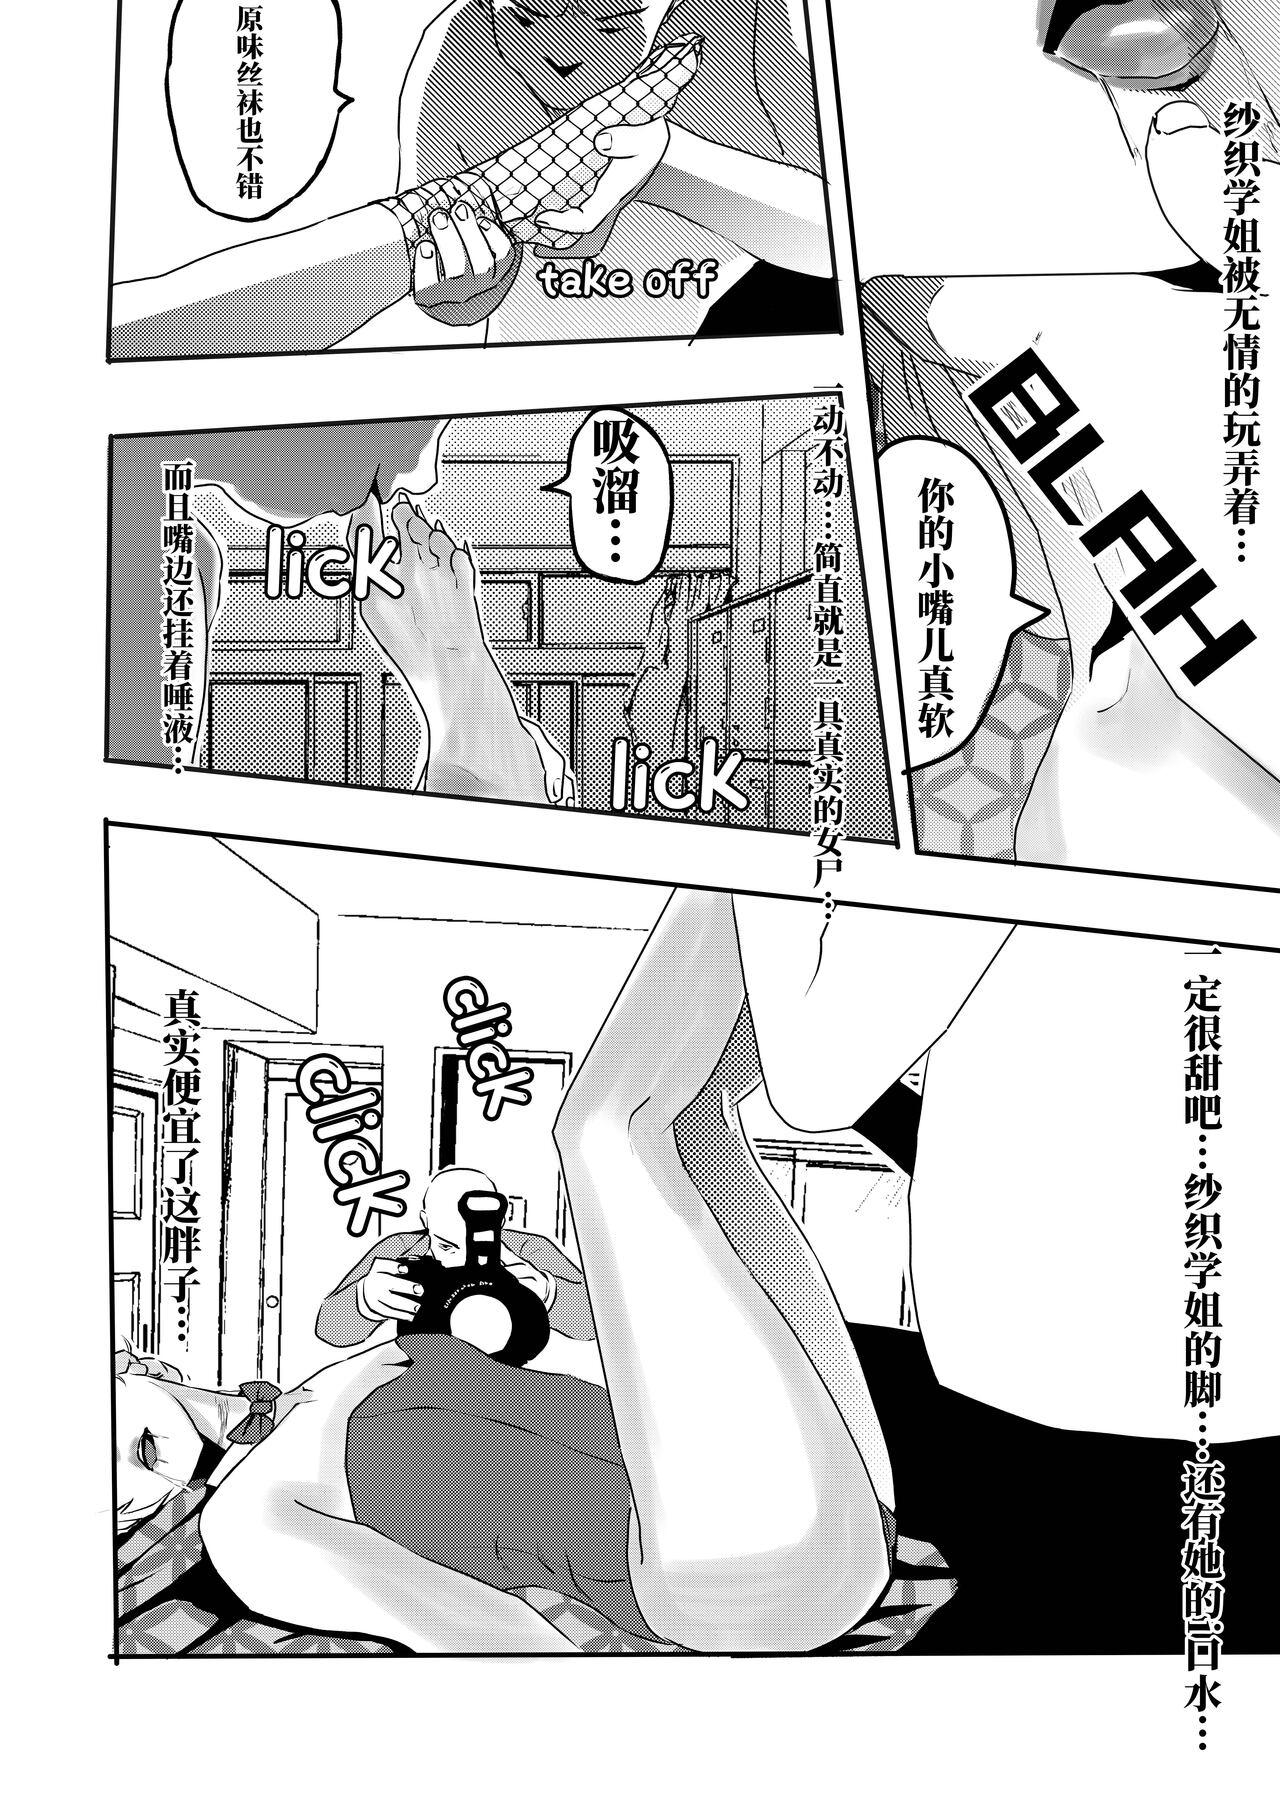 [KAO.YELLOW STUDIO (T.C.X)] I must be out of my mind to fall in love with SAORI, the Snuff Queen Ch.1-16 | 想与冰恋女王纱织同学谈恋爱的我脑子一定有问题 第1-16话 [Chinese] 20